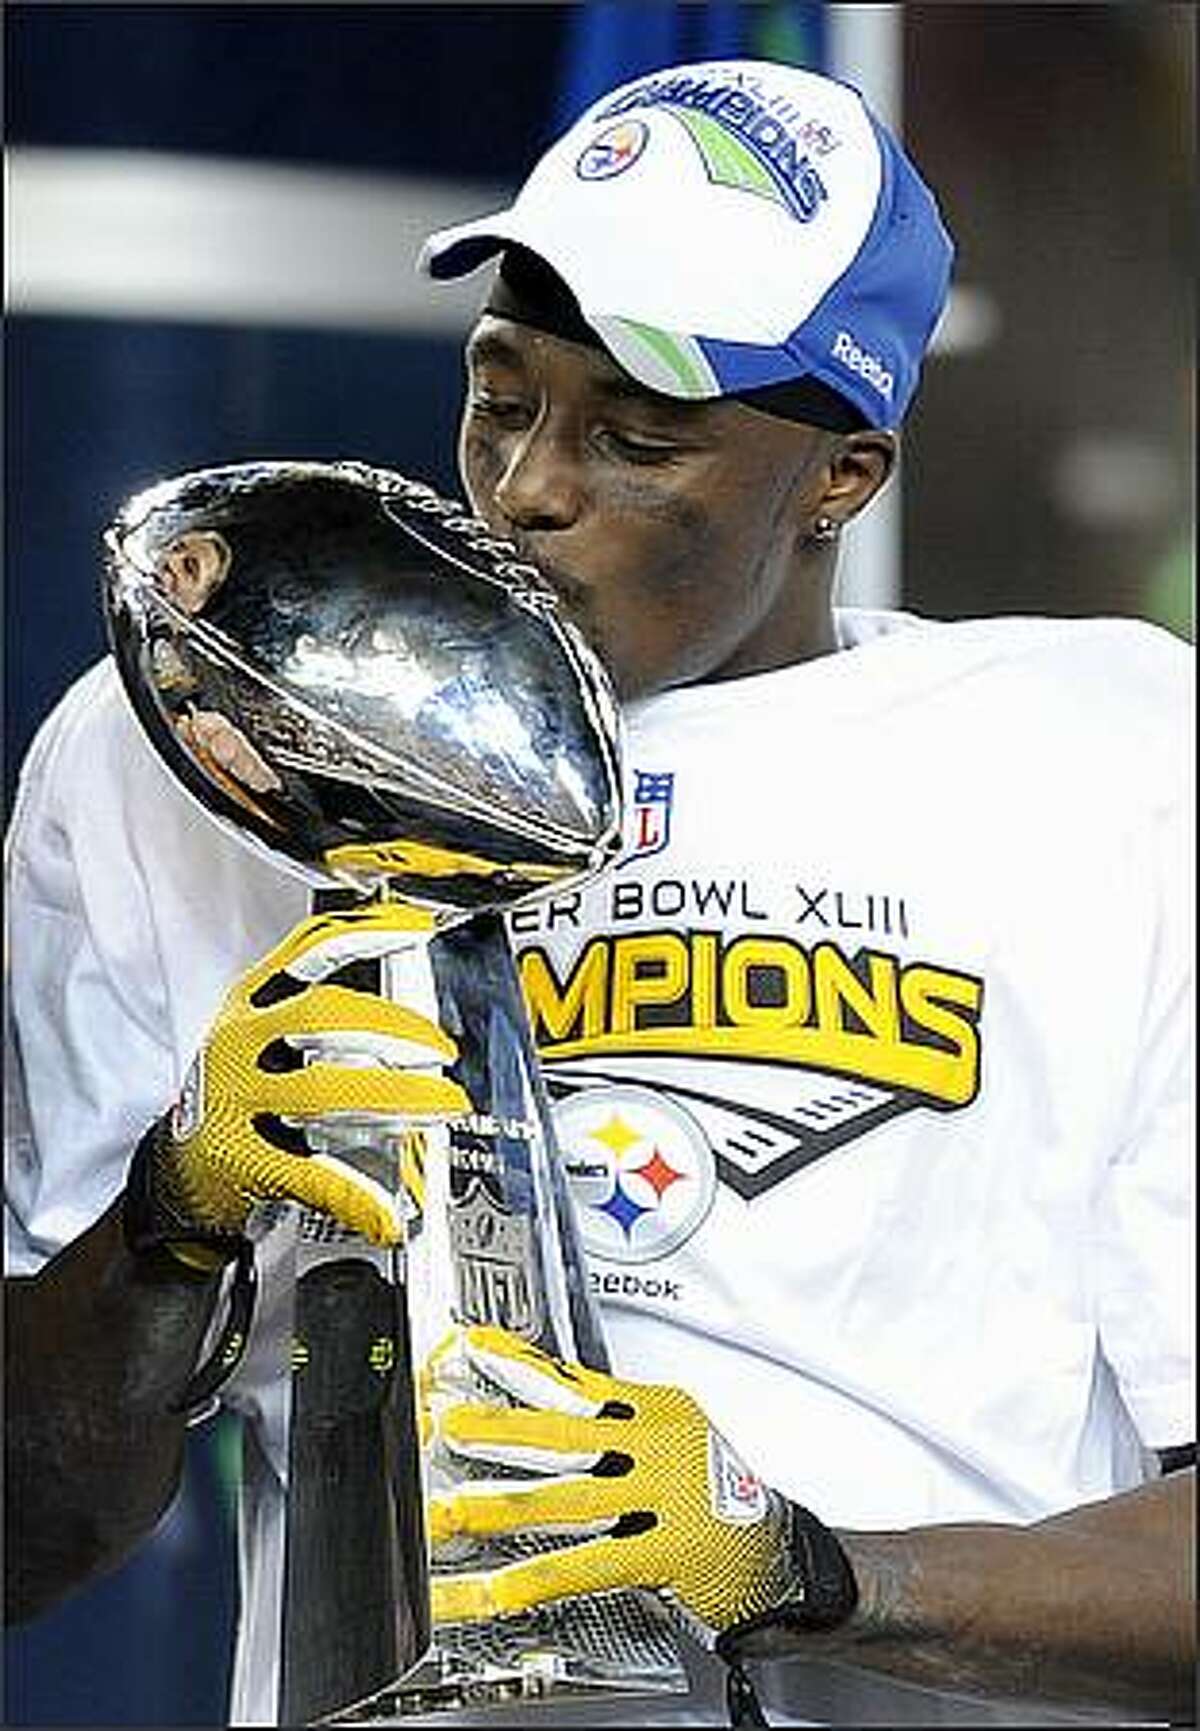 Super Bowl XLIII MVP Santonio Holmes of the Pittsburgh Steelers kisses the Vince Lombardi trophy after defeating the Arizona Cardinals 27-23.(TIMOTHY A. CLARY/AFP/Getty Images)